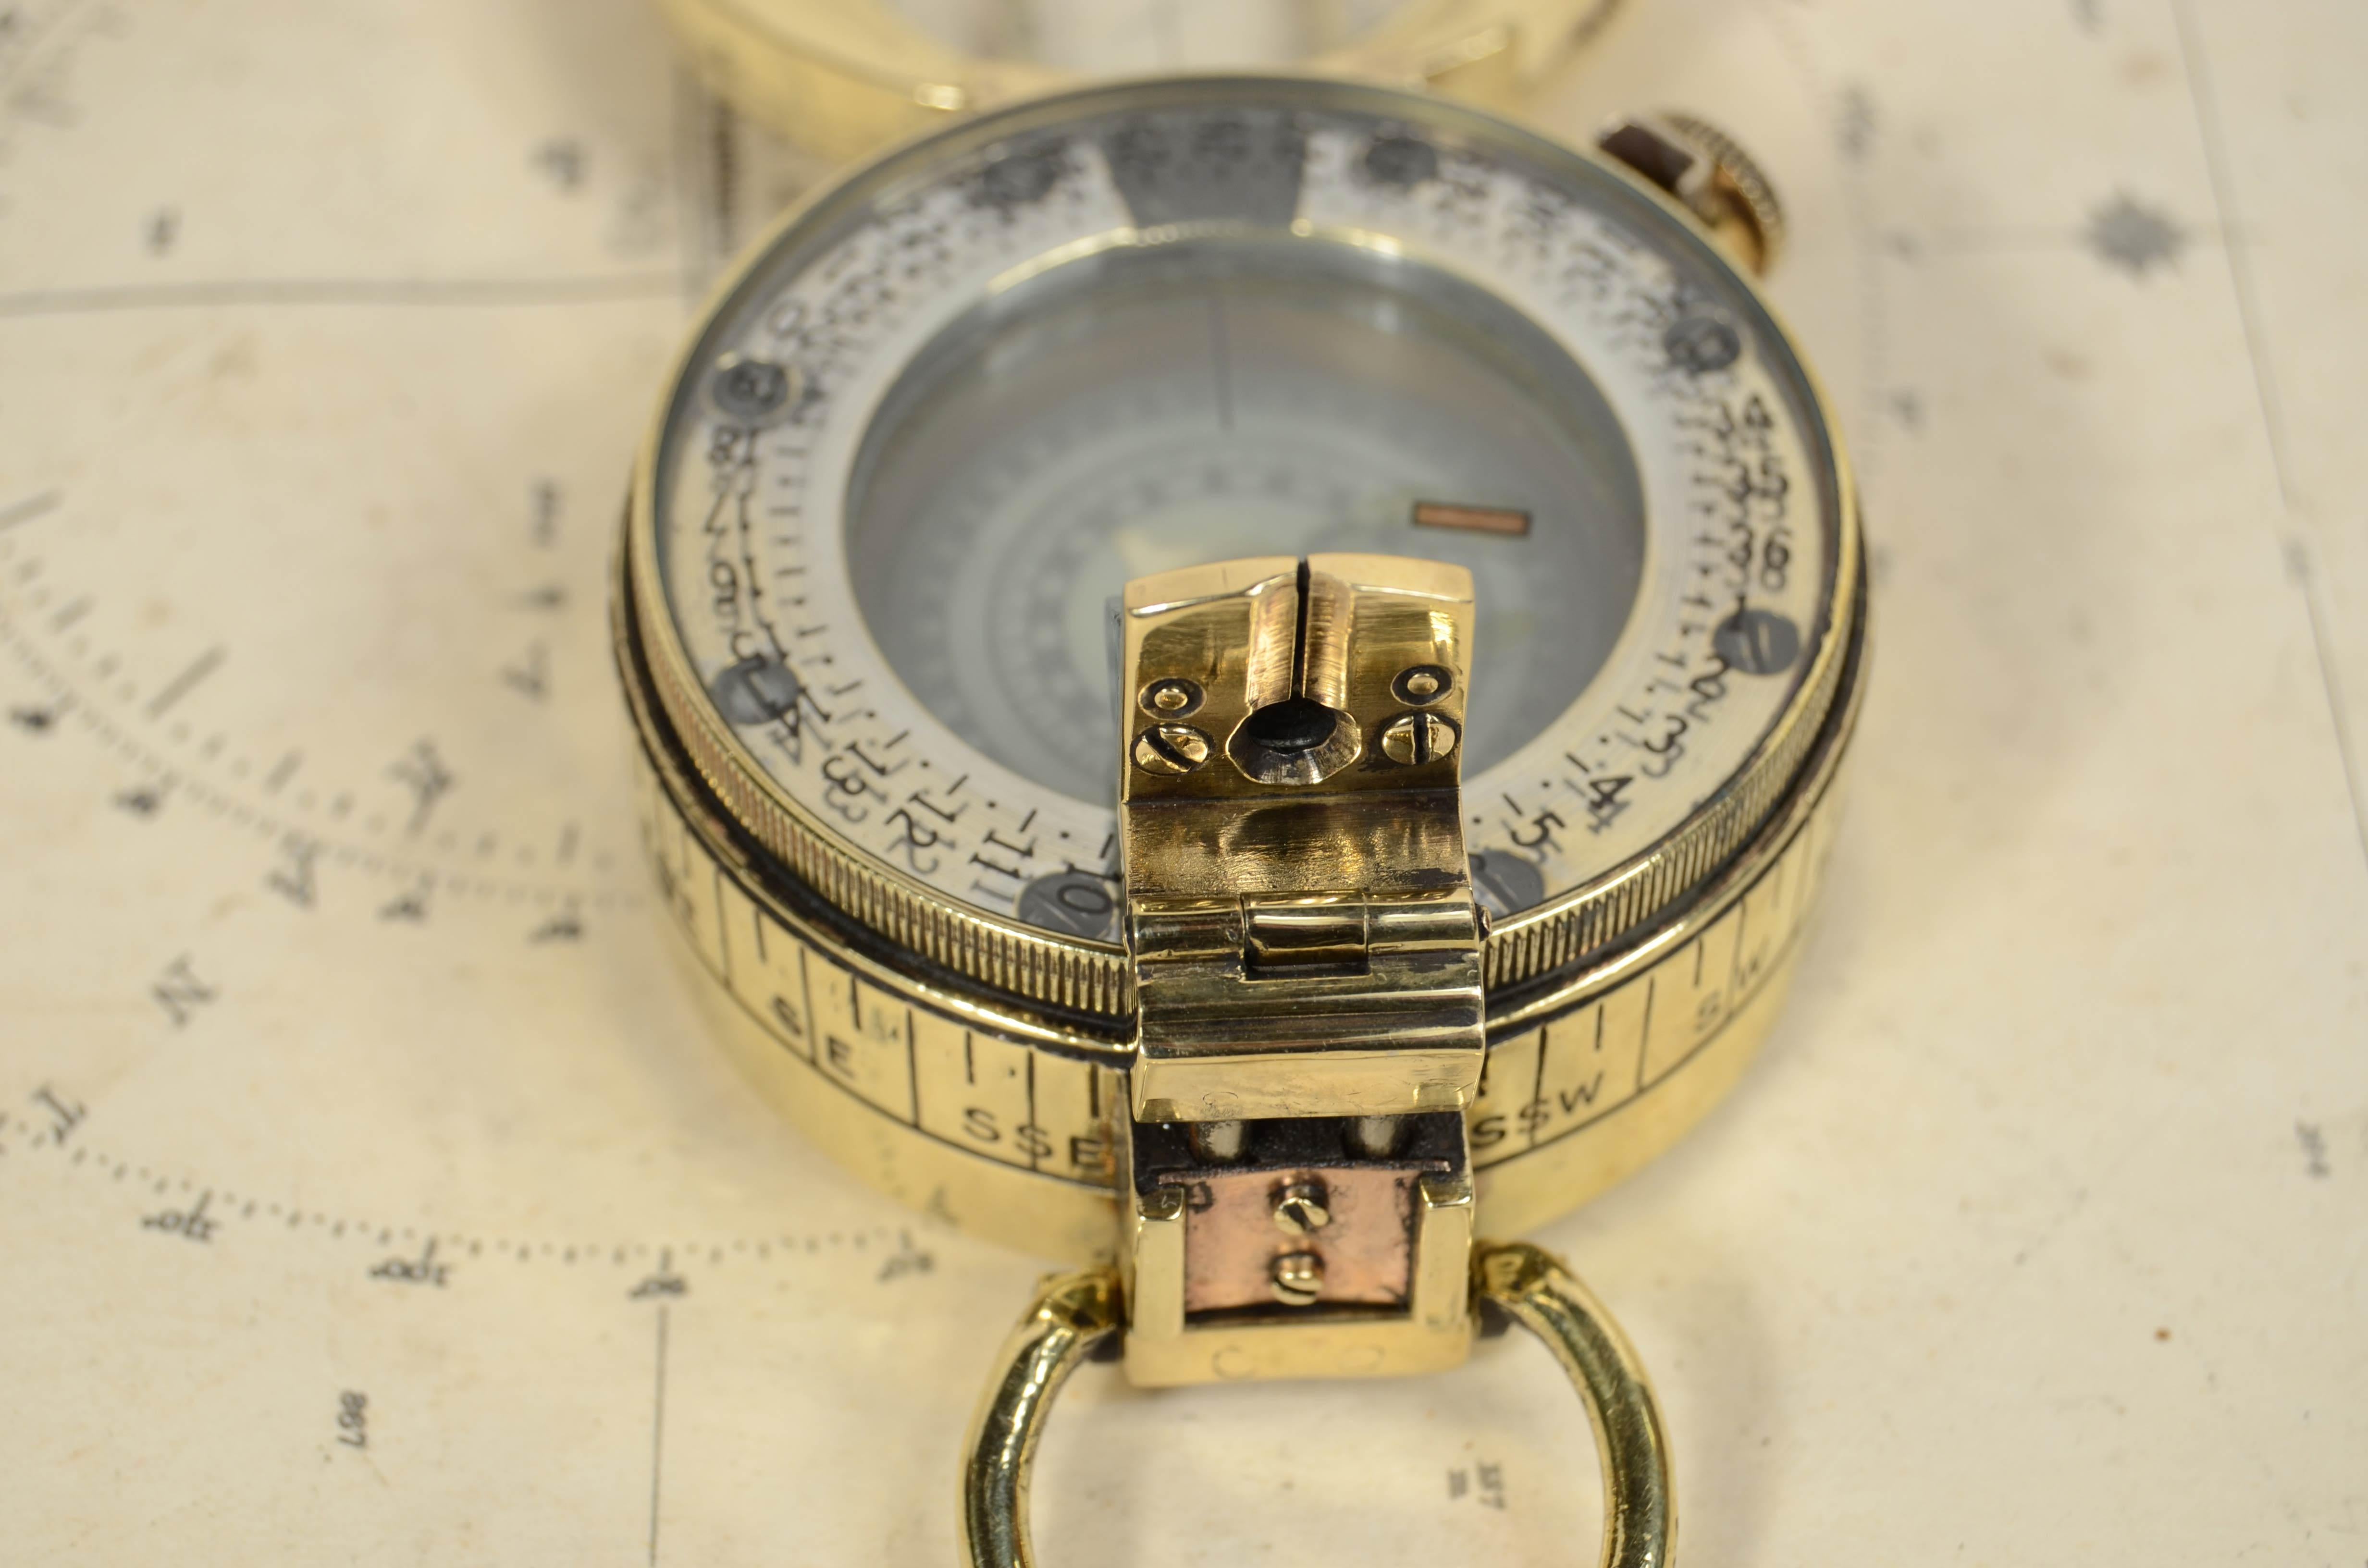 Prismatic compass  by detection signed T.G. Co Ltd London no. B 21681 1940 MK For Sale 6